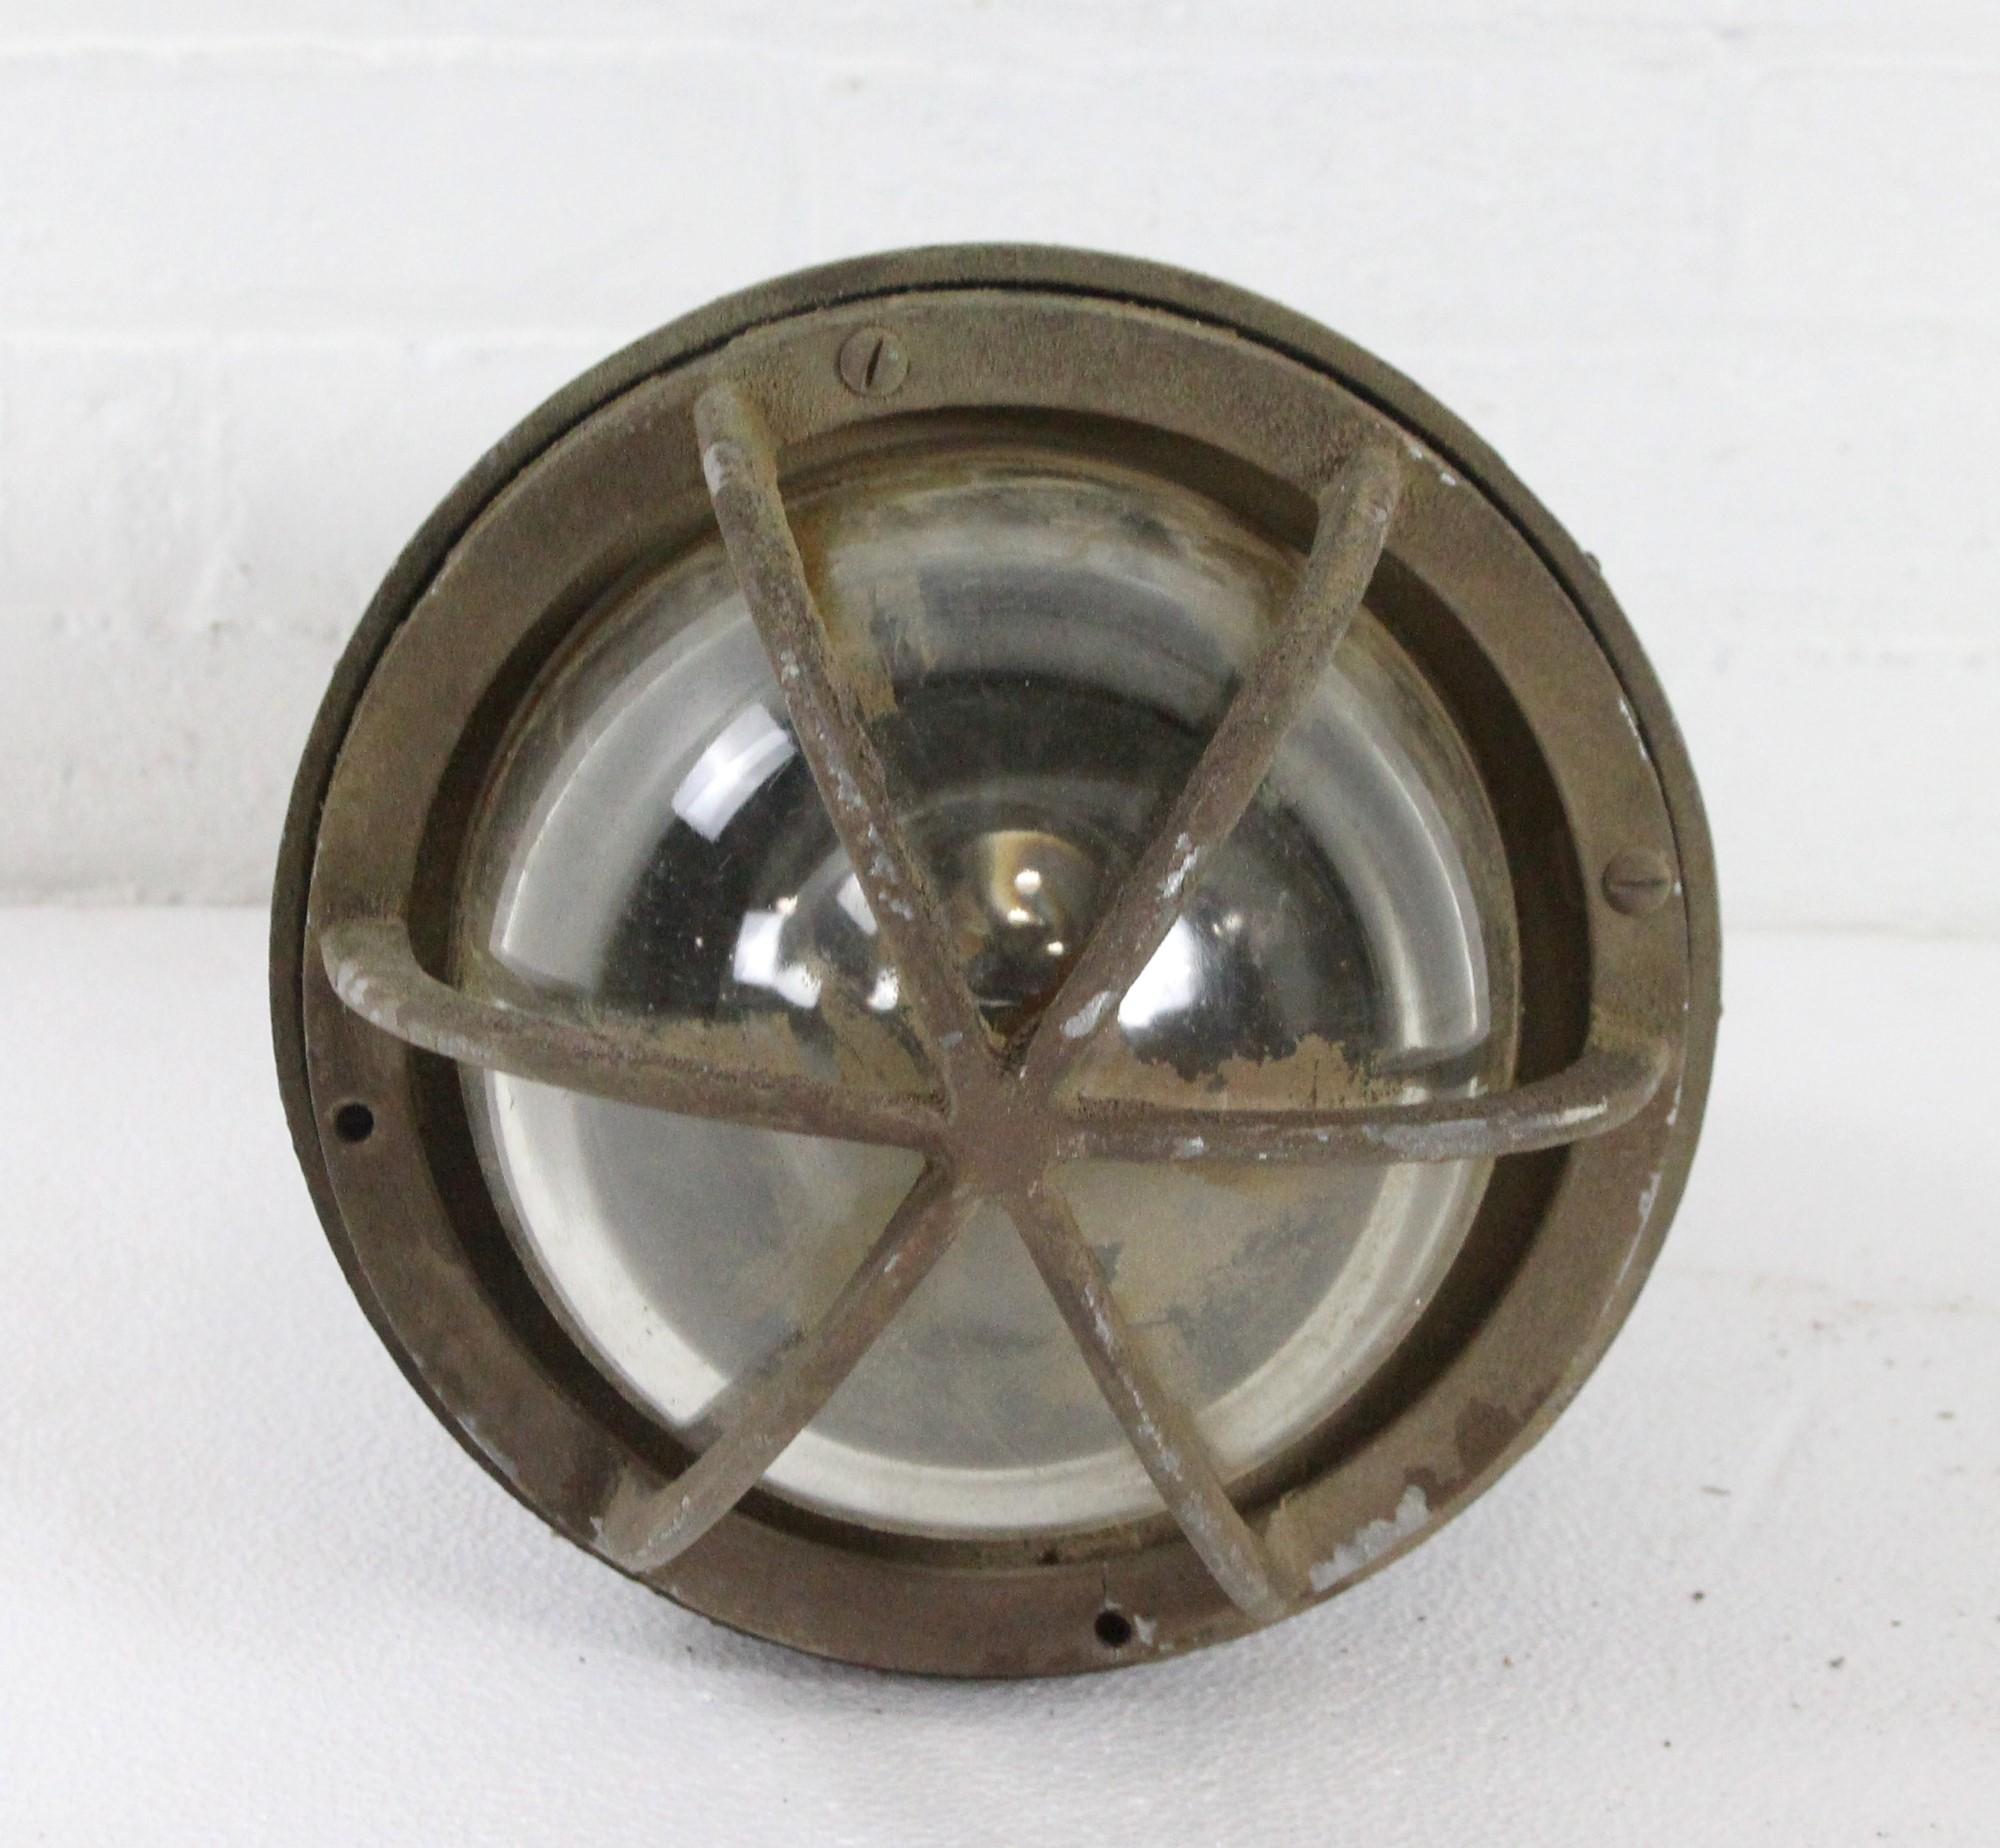 Large scale 1940s explosion proof light retrieved from an industrial factory. Made of cast aluminum with a cage over a spherical glass lens. Made by Killark Electric MFG. Co. This can be seen at our 400 Gilligan St location in Scranton, PA.